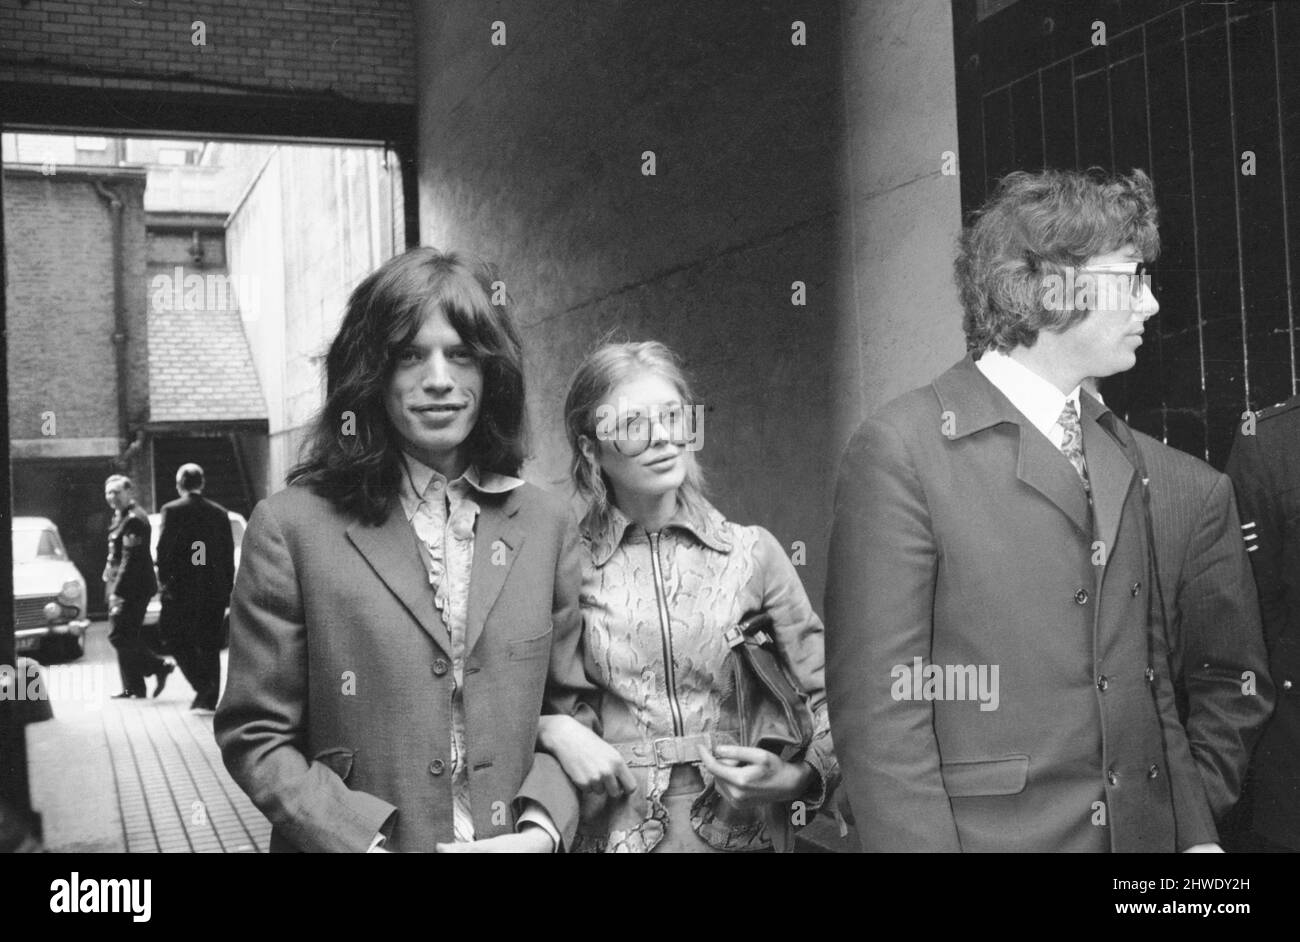 Rolling Stones: Mick Jagger and his girlfriend Marianne Faithful leave Marylebone magistrates court on 29th May 1969 after being charged with possession of cannabis and arrested the previous evening at their Chelsea home. They were remanded on bail.. Stock Photo